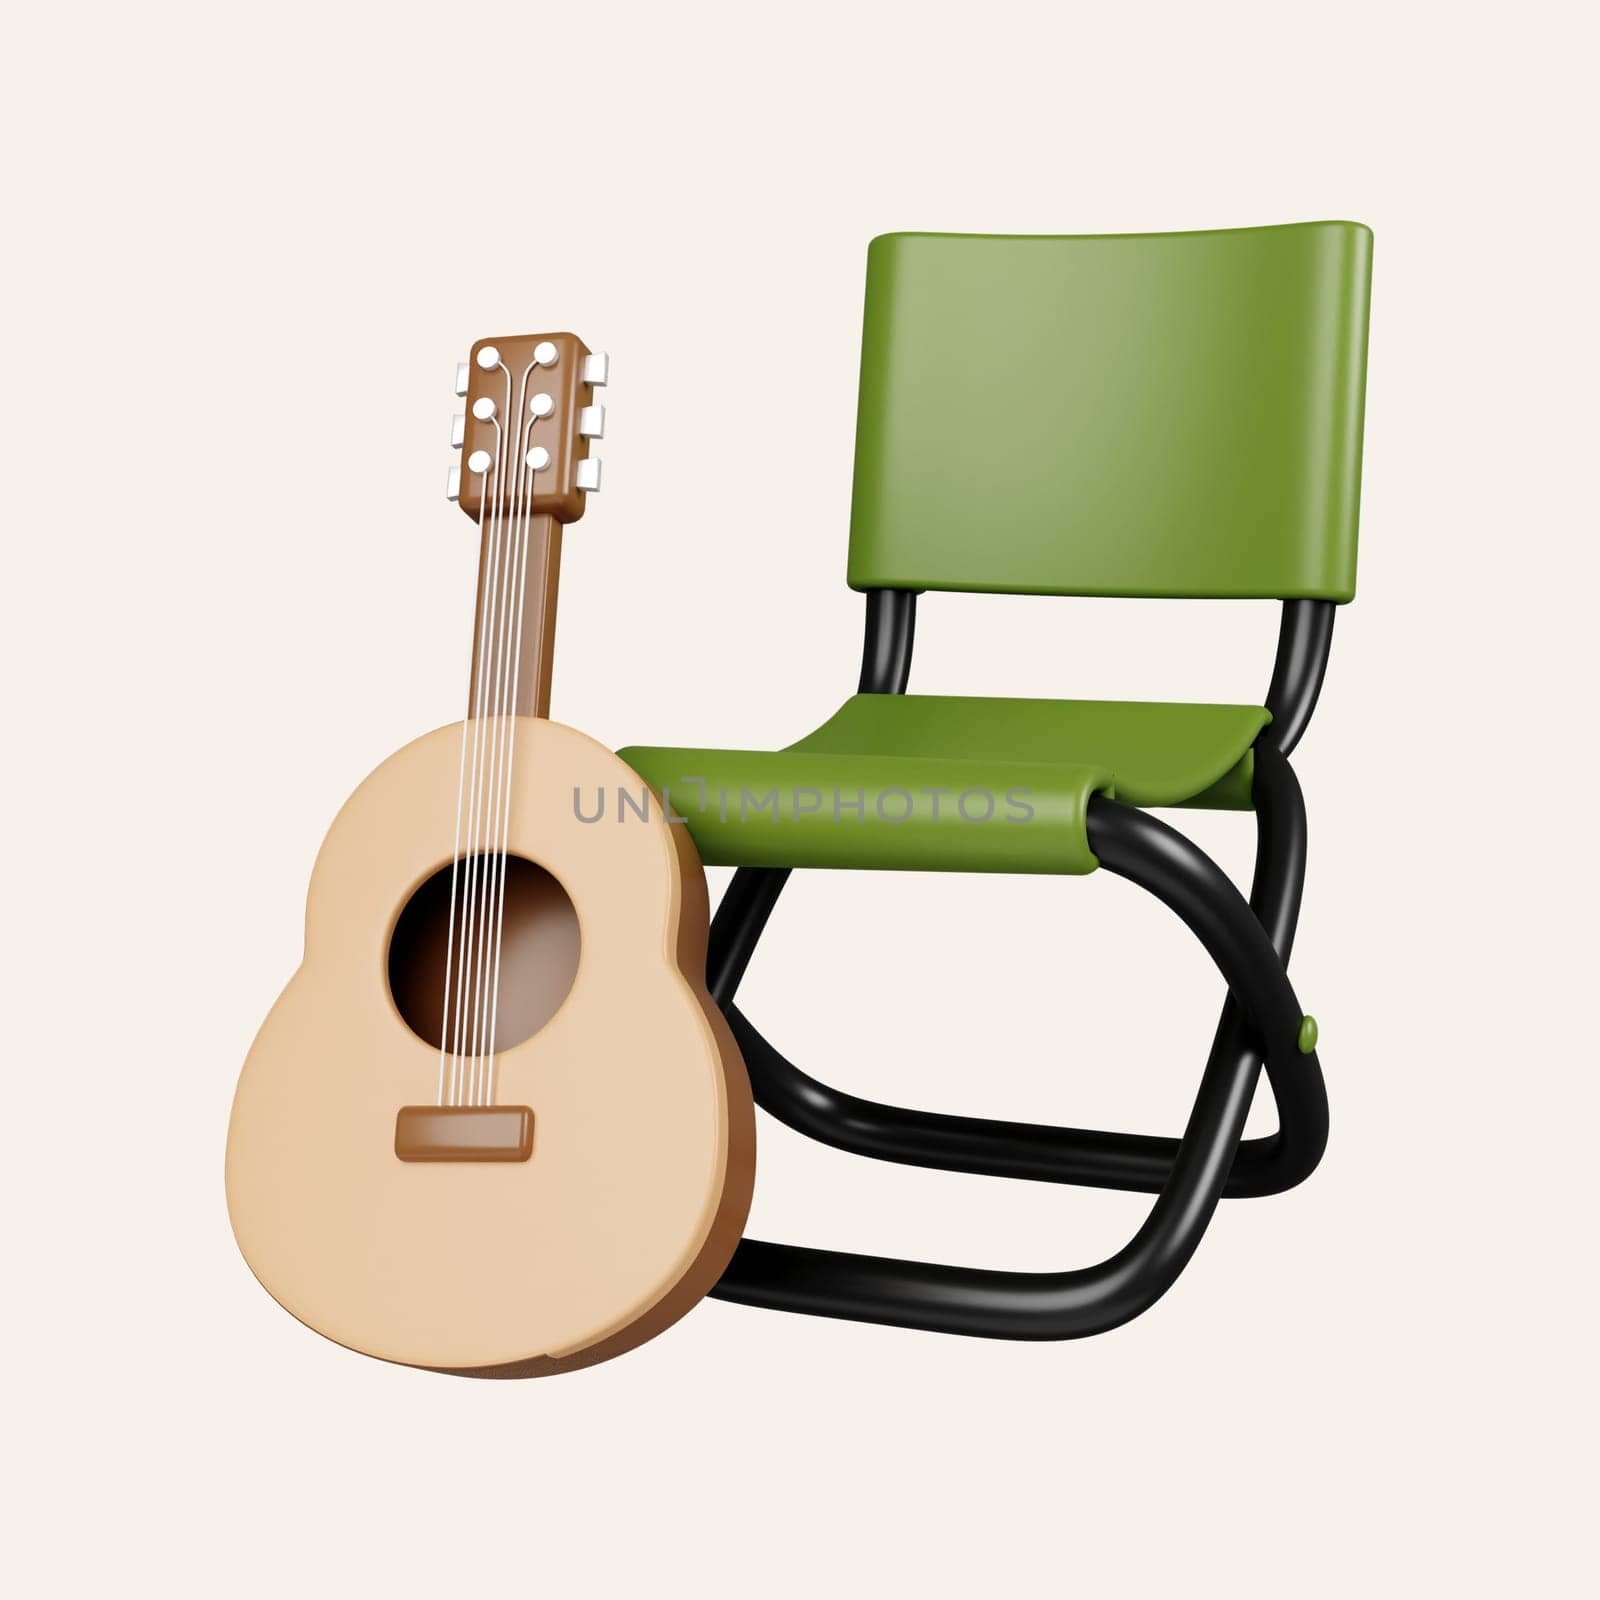 3d camping chair with guitar . elements for camping, hiking , summer camp, traveling, trip. icon isolated on white background. 3d rendering illustration. Clipping path. by meepiangraphic